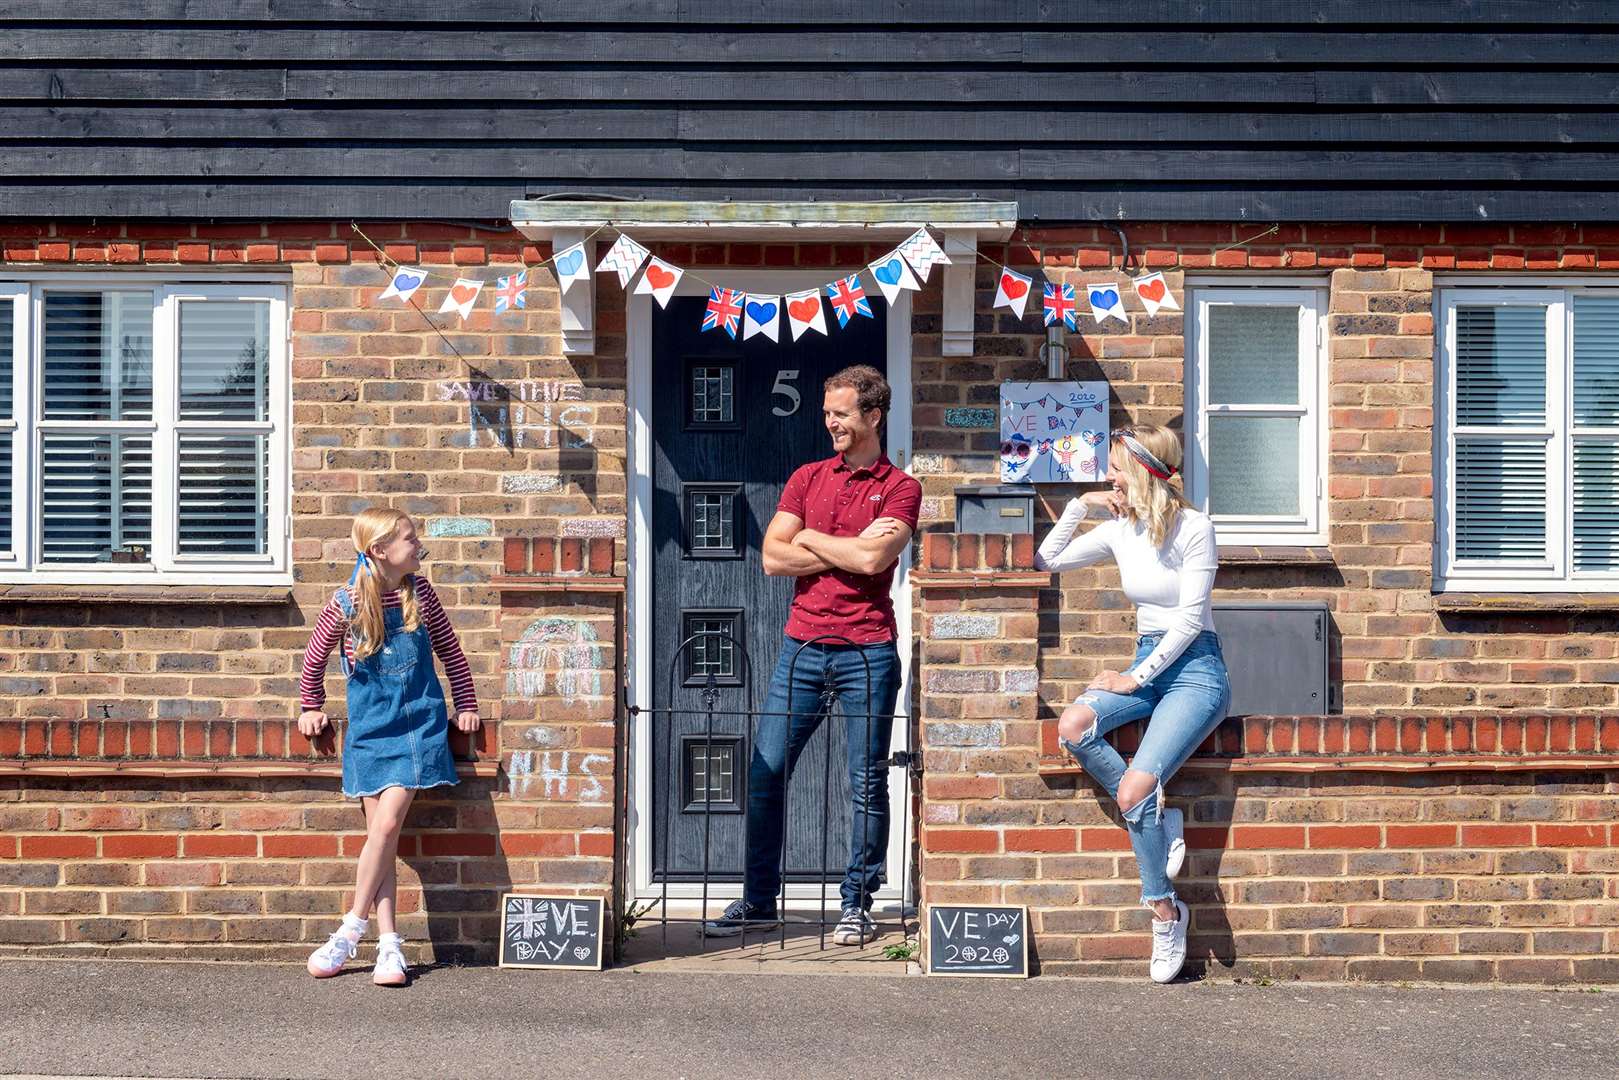 David and Jemma Rannard and daughter Eva of Click:Create at Iwade offering VE Day photos on your doorstep